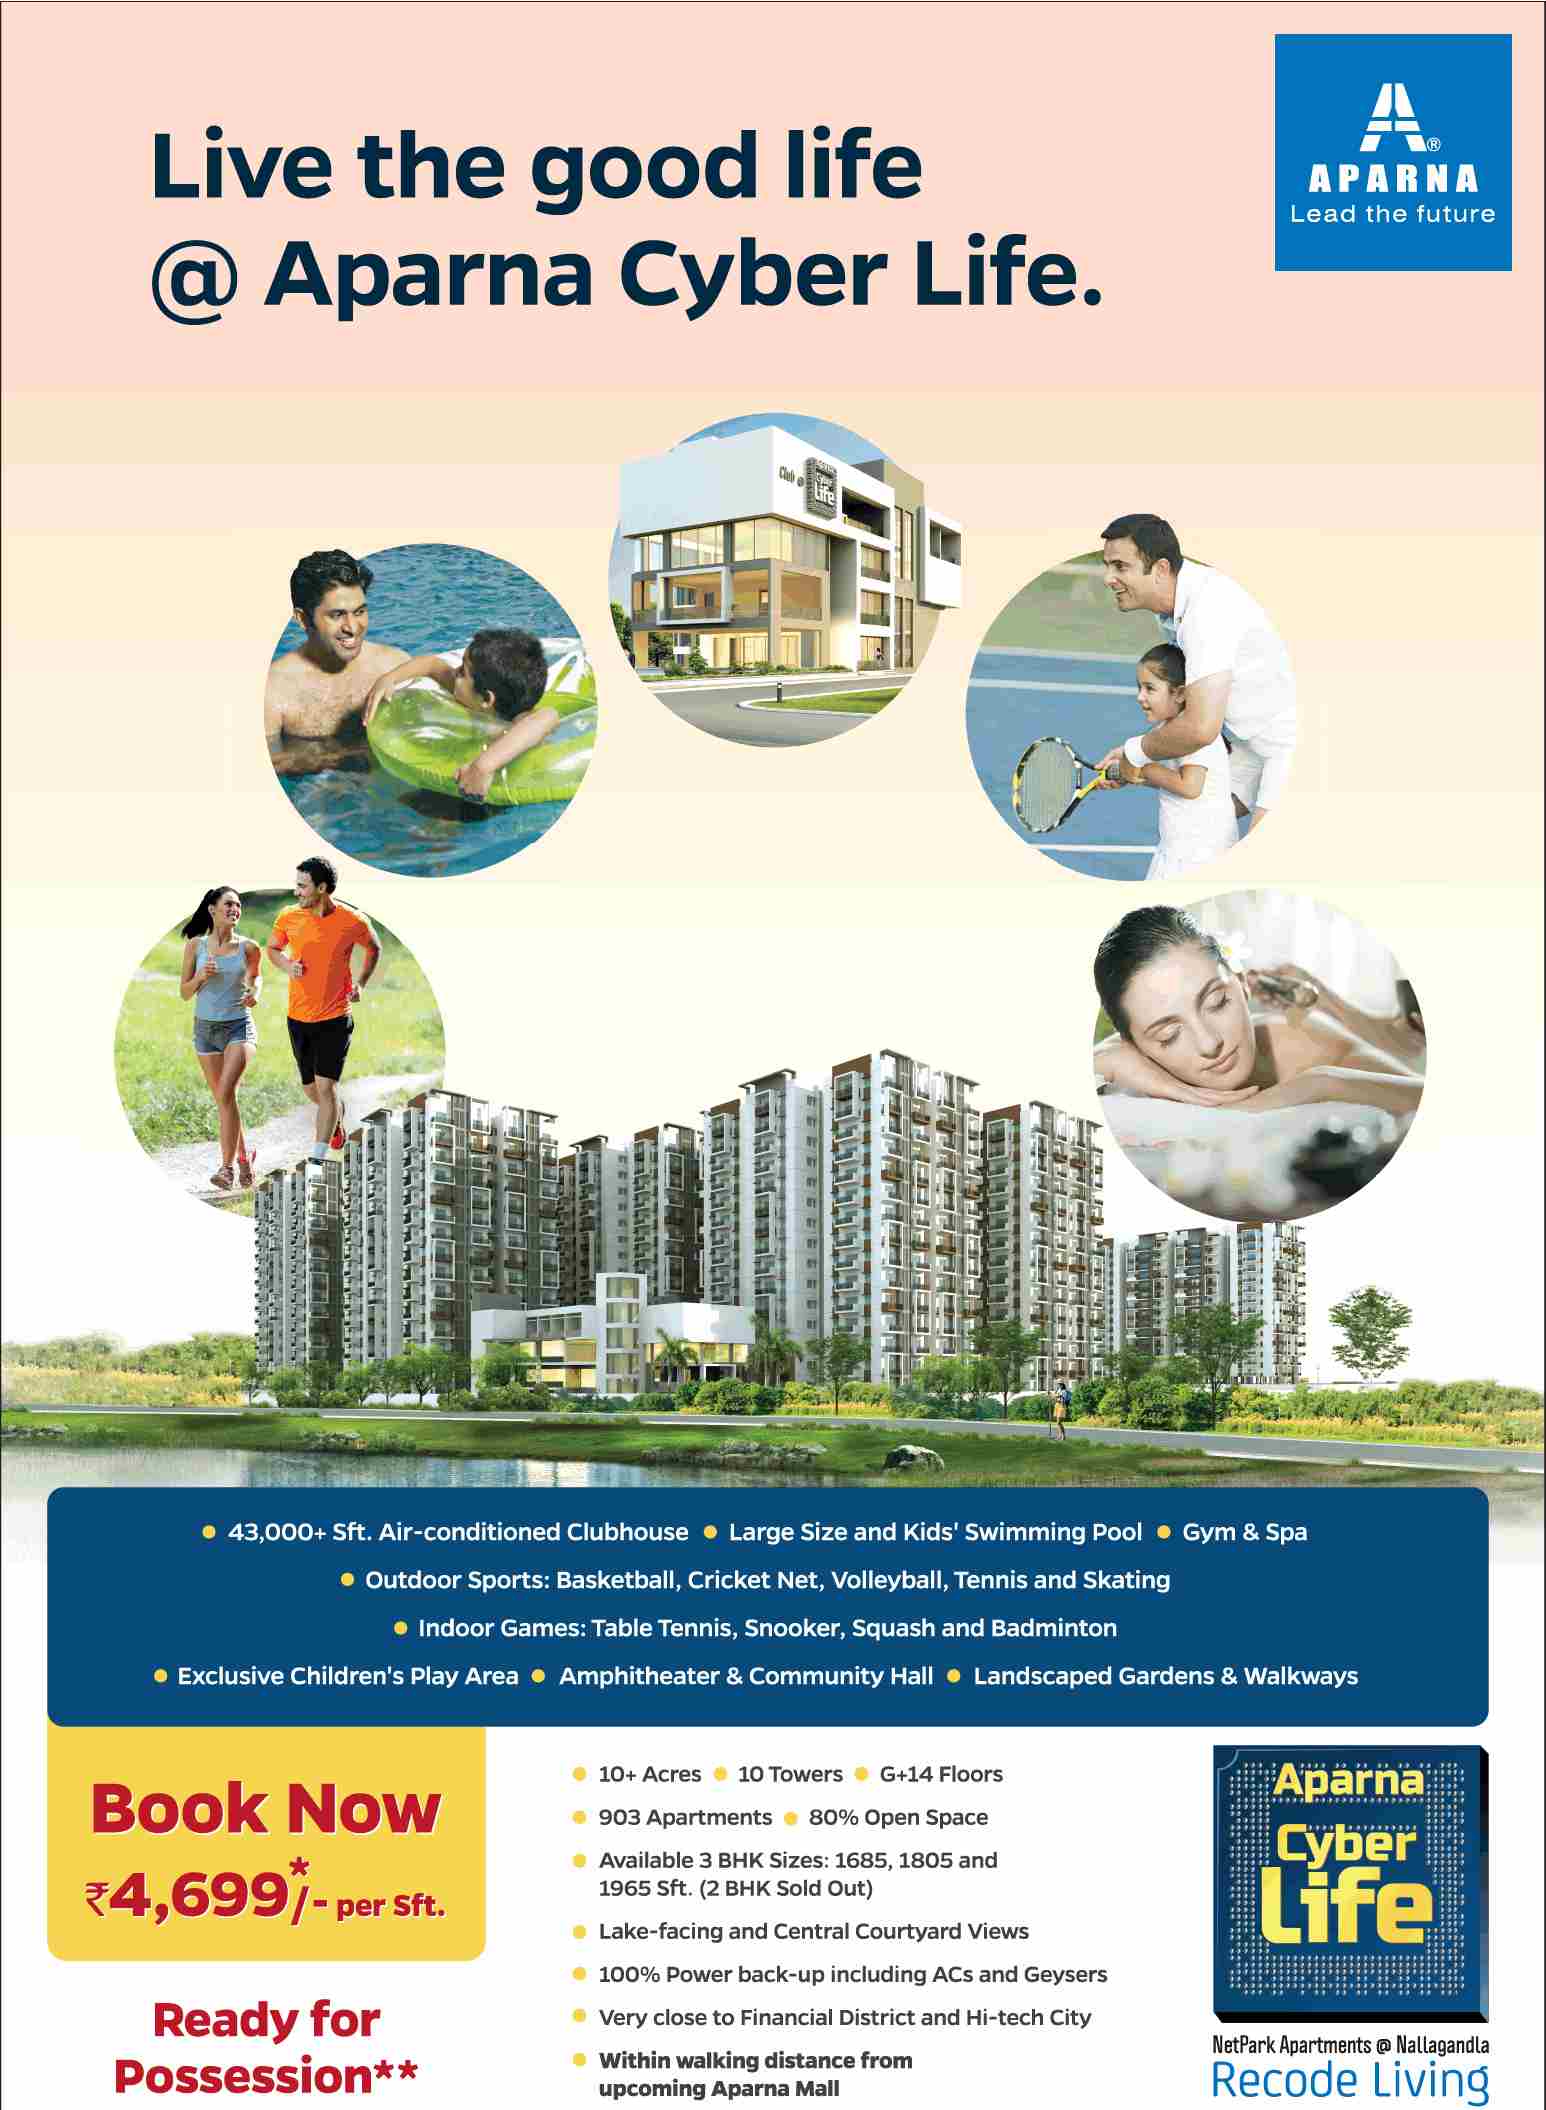 Aparna Cyber Life is now ready for possession in Hyderabad